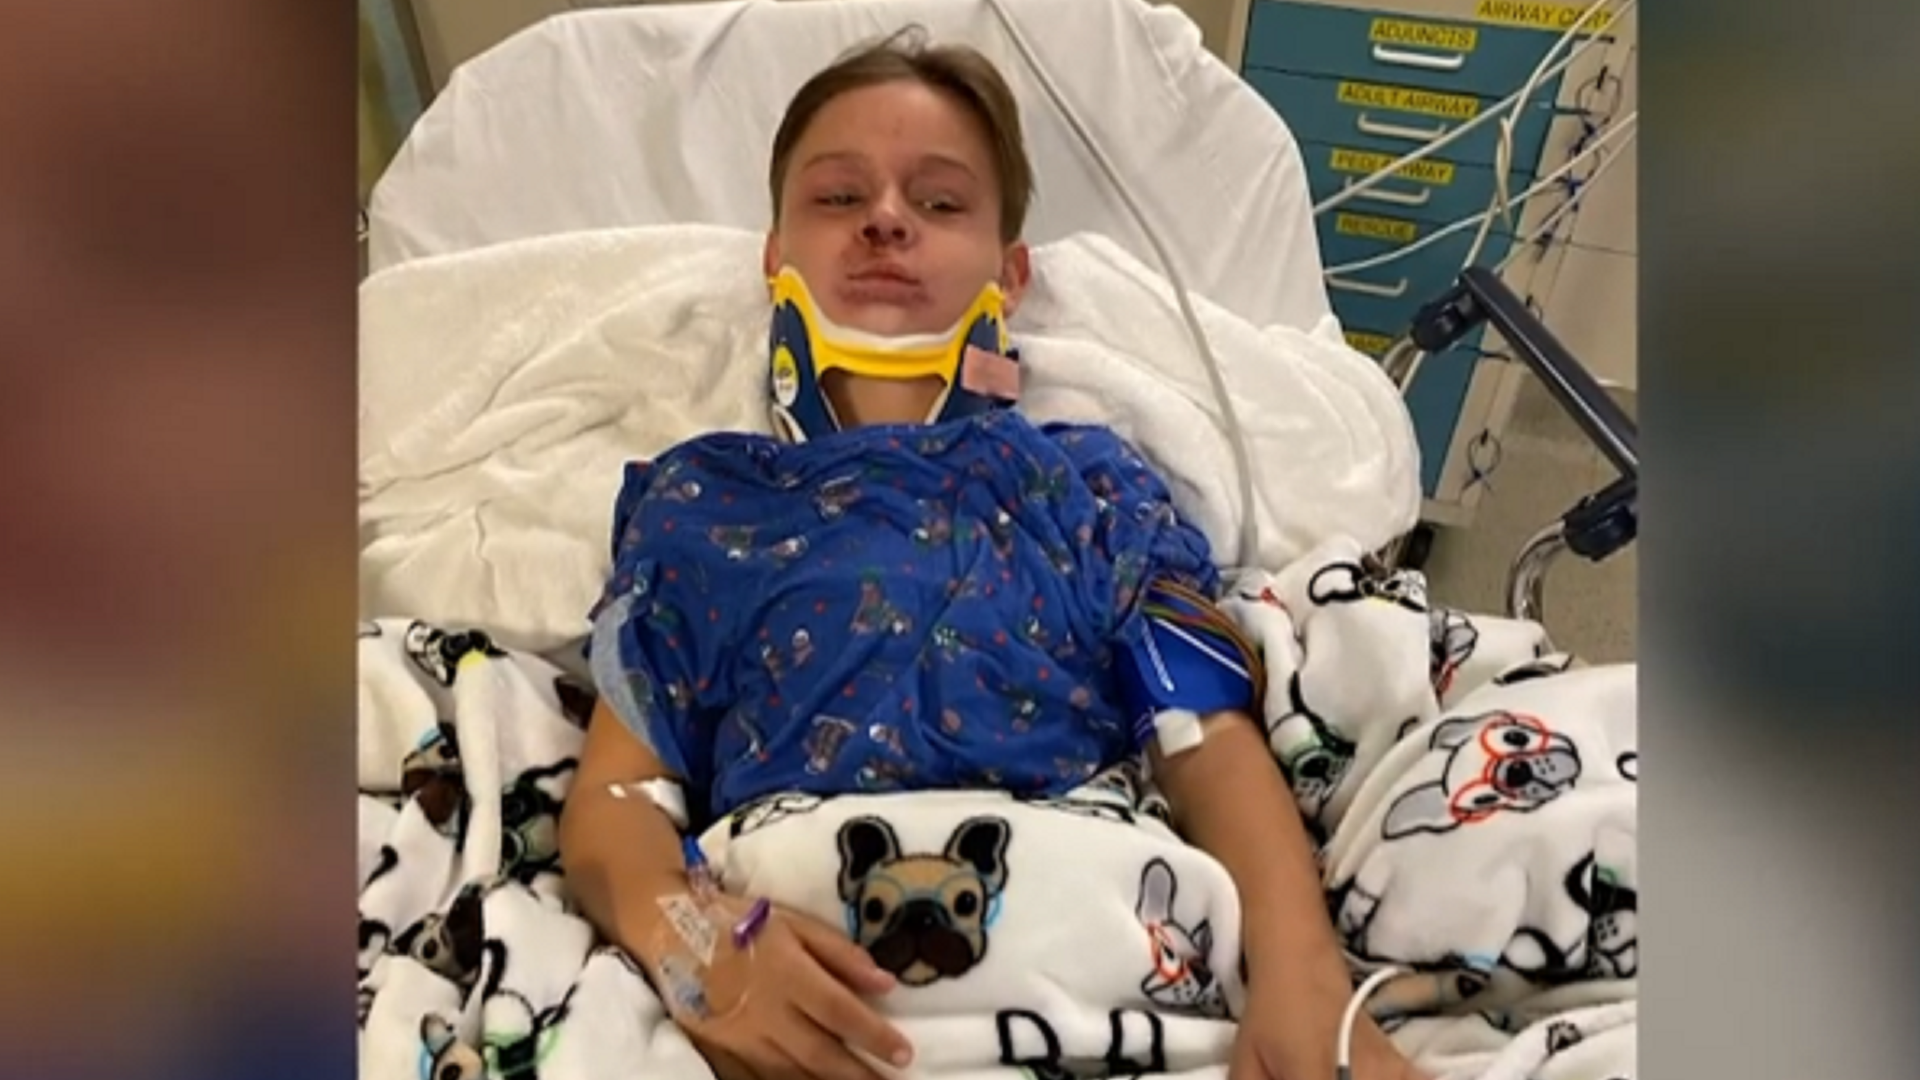 An 8-year-old boy from Massachusetts is recovering after a scary incident in which he became tangled in his seat belt and said he was choking